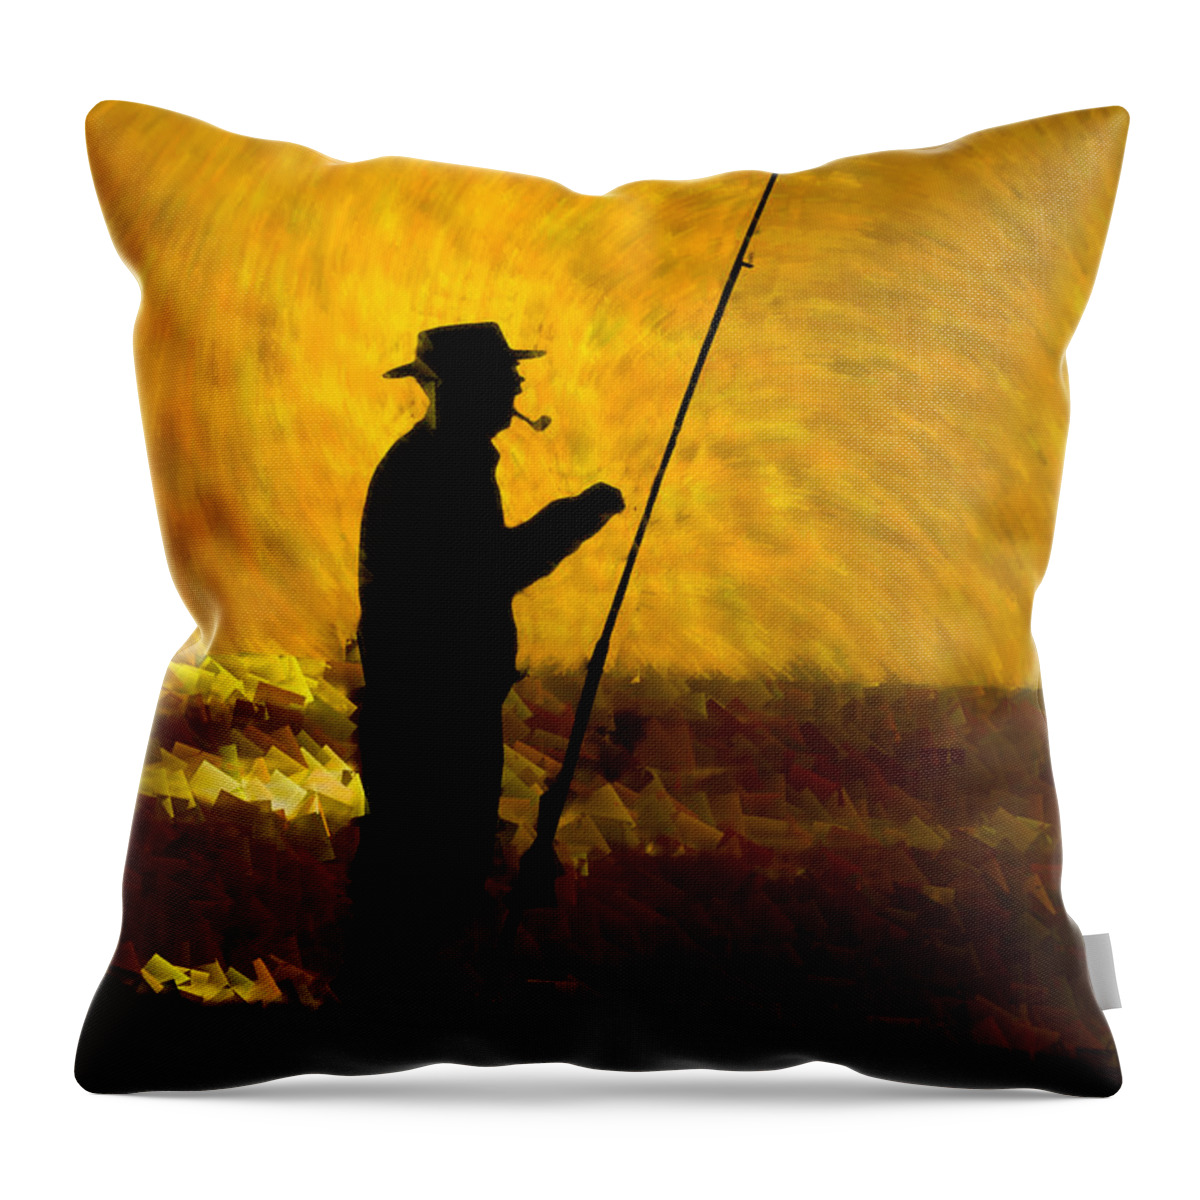 Photography Throw Pillow featuring the photograph Tranquility by Paul Wear